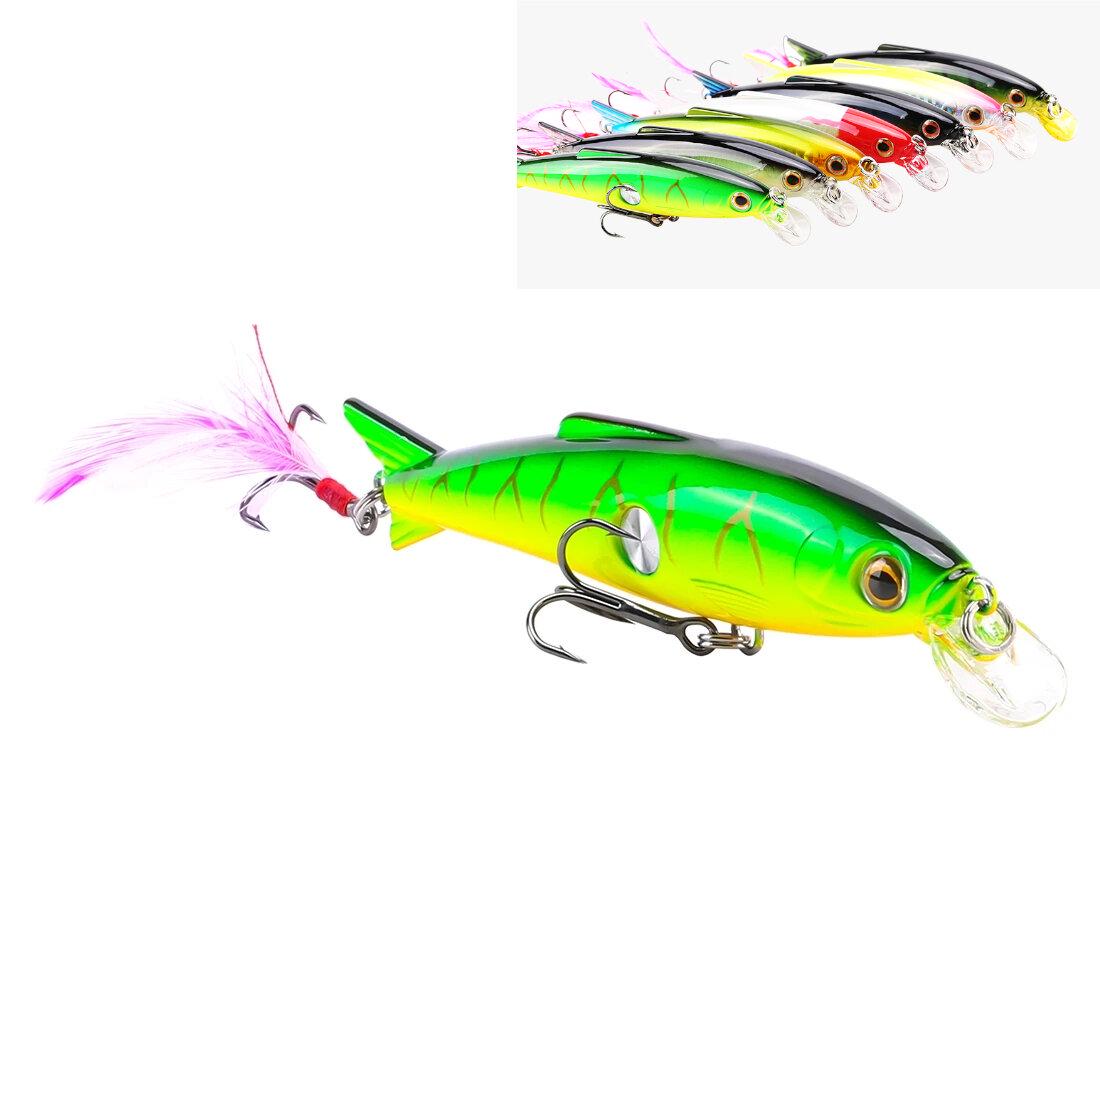 SeaKnight SK007 Minnow 16g 100mm 0.6-1.2M 1PC Fishing Lures with Feather Artificial Baits Swimbait Wobblers Minnow Fishing Lure